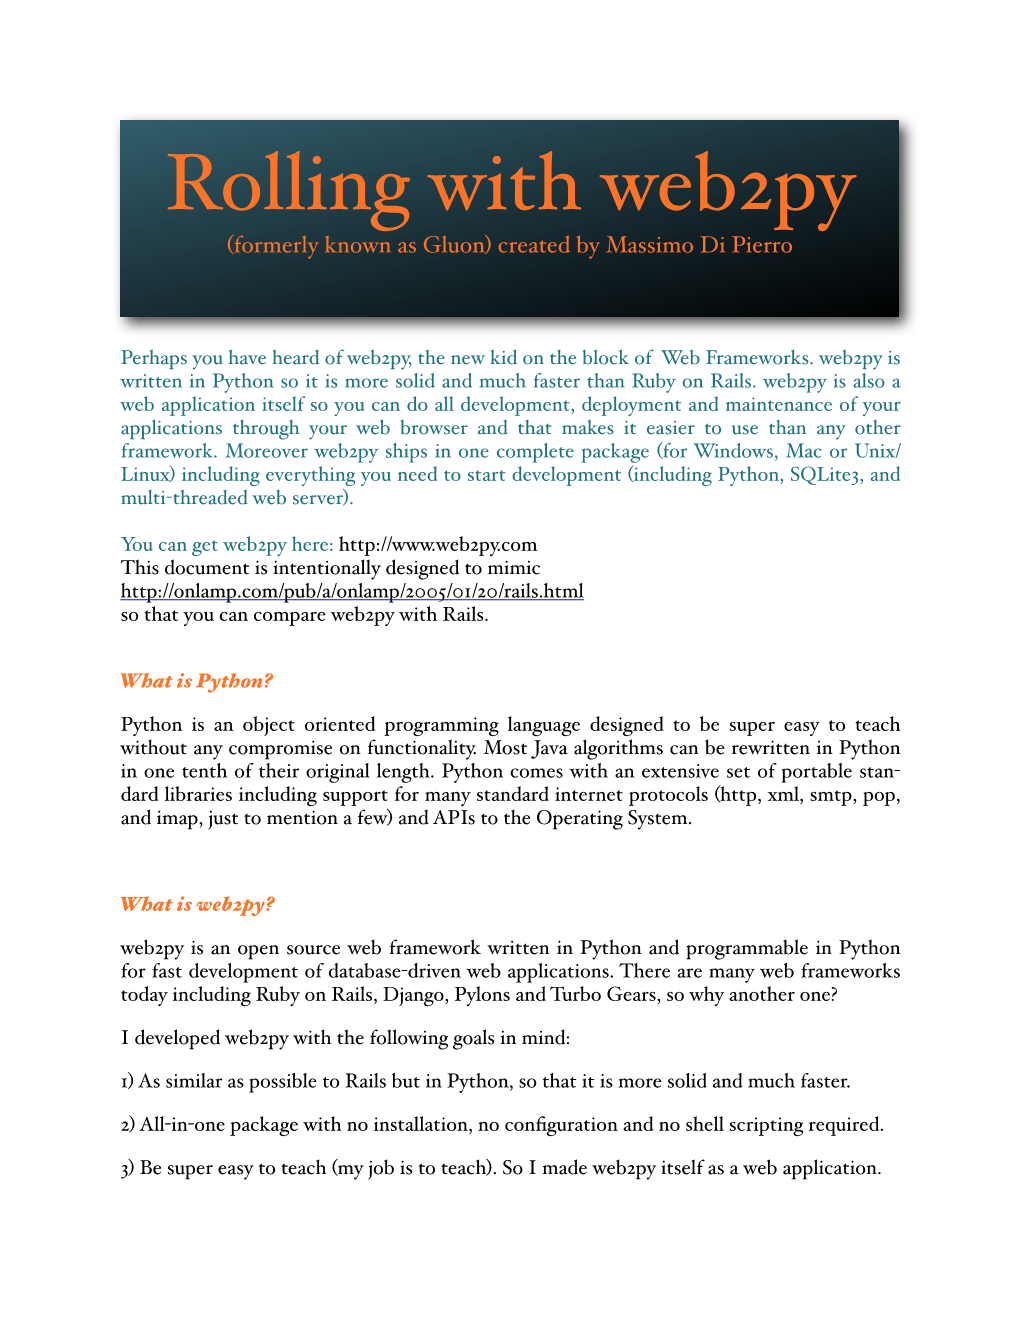 Rolling with Web2py (Formerly Known As Gluon) Created by Massimo Di Pierro